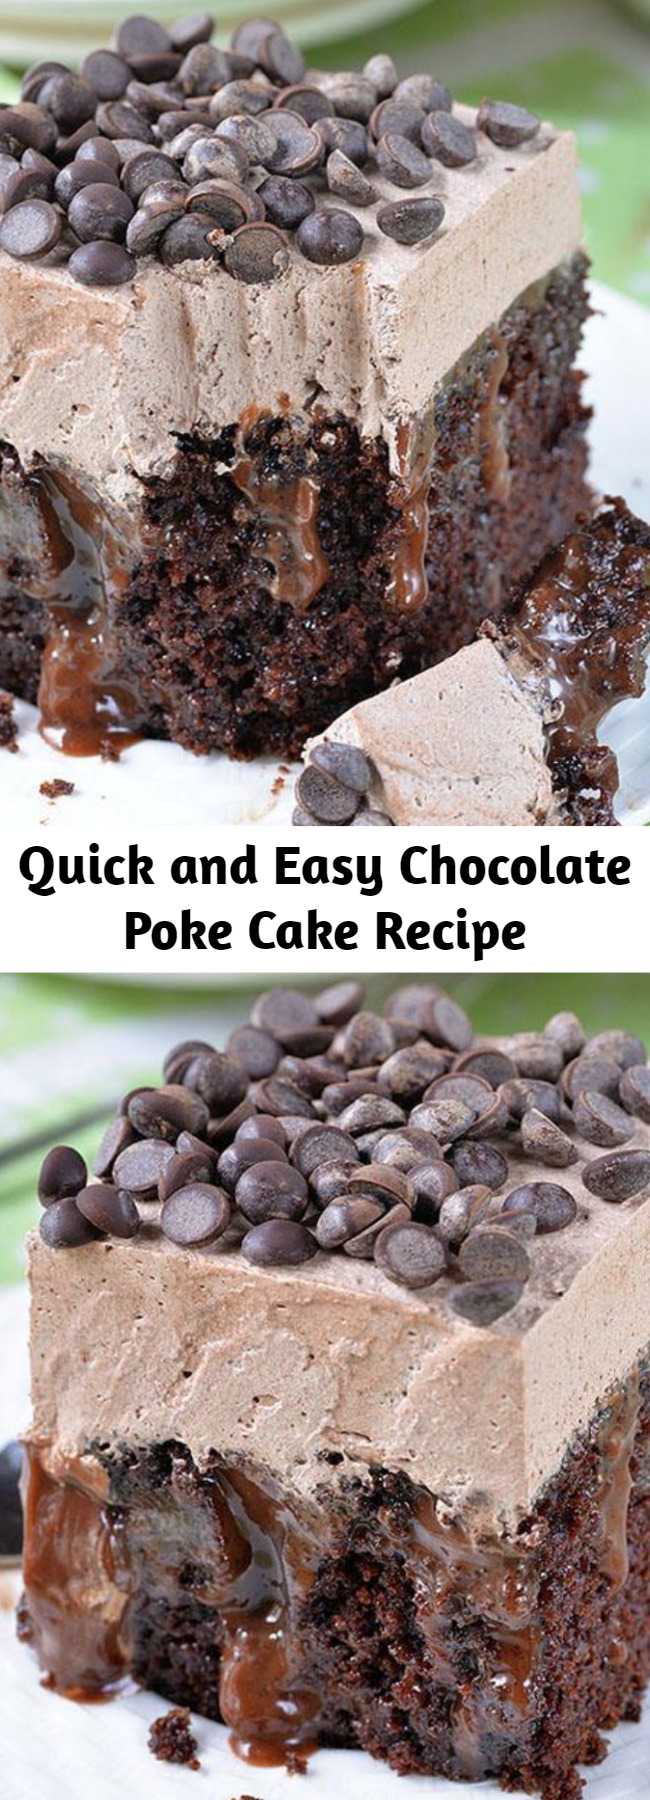 Quick and Easy Chocolate Poke Cake Recipe - Chocolate Poke Cake is quadruple chocolate treat-rich chocolate cake infused with delicious mixture of melted chocolate and sweetened condensed milk, topped with chocolate whipped cream and chocolate chips.